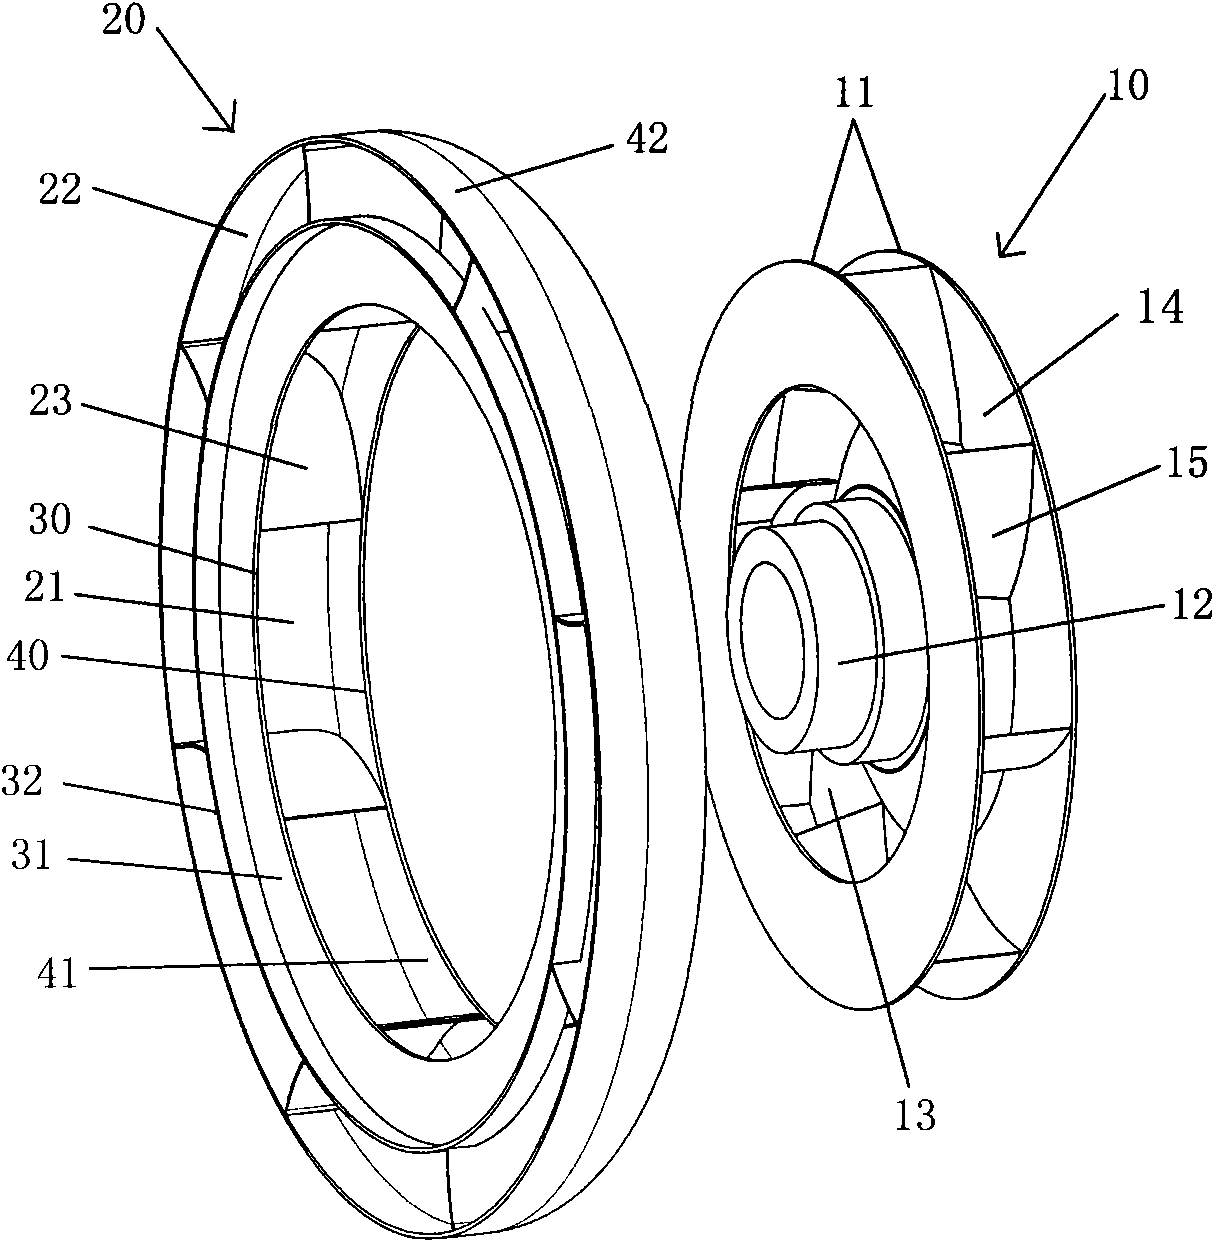 Centrifugal fan and closed motor with same